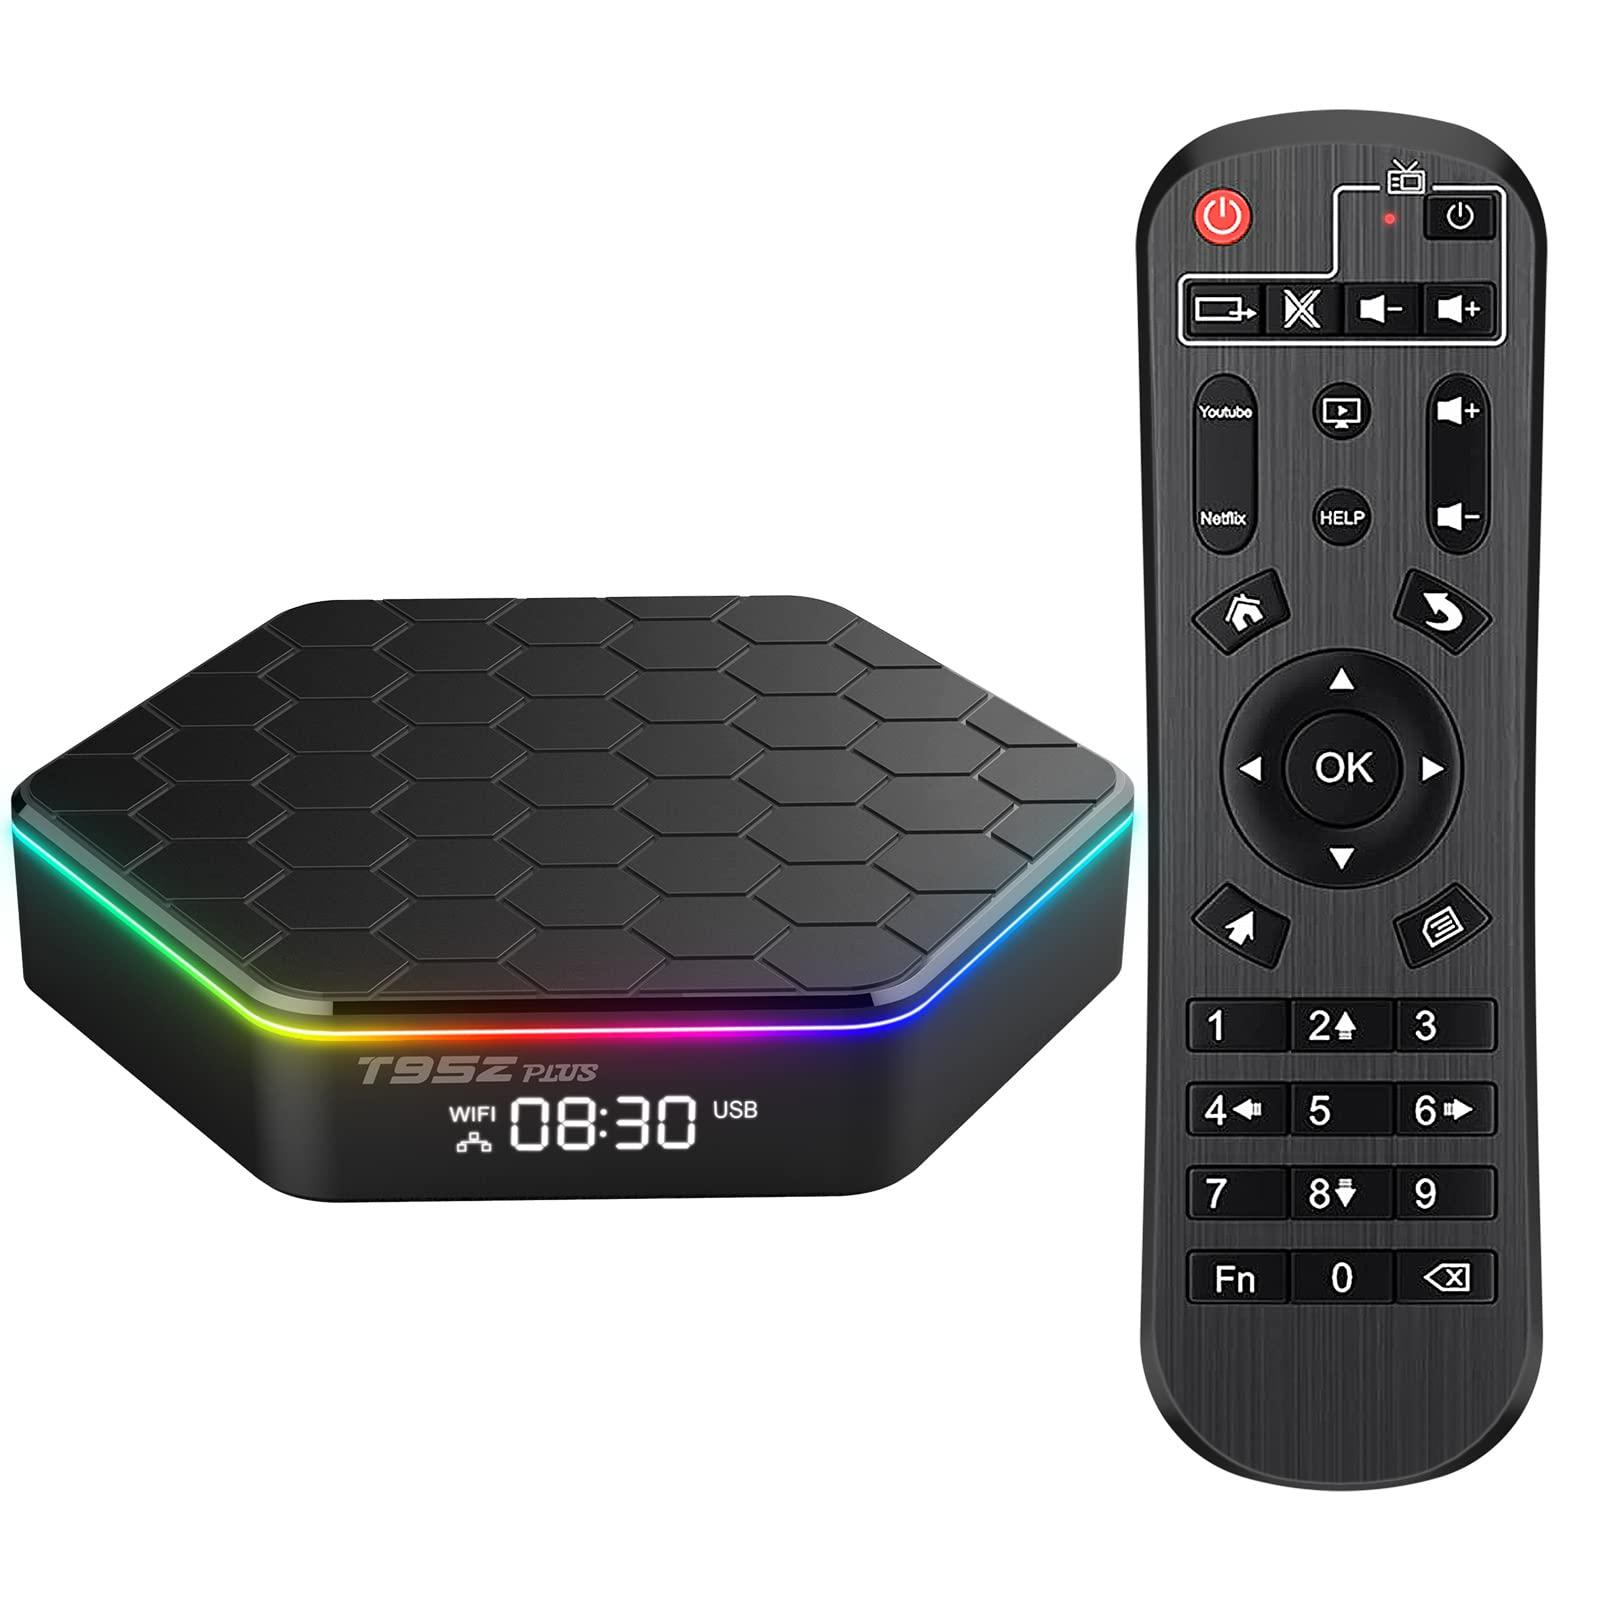 T95Z Plus Android 12.0 TV Box Review: Is It Worth The Hype?